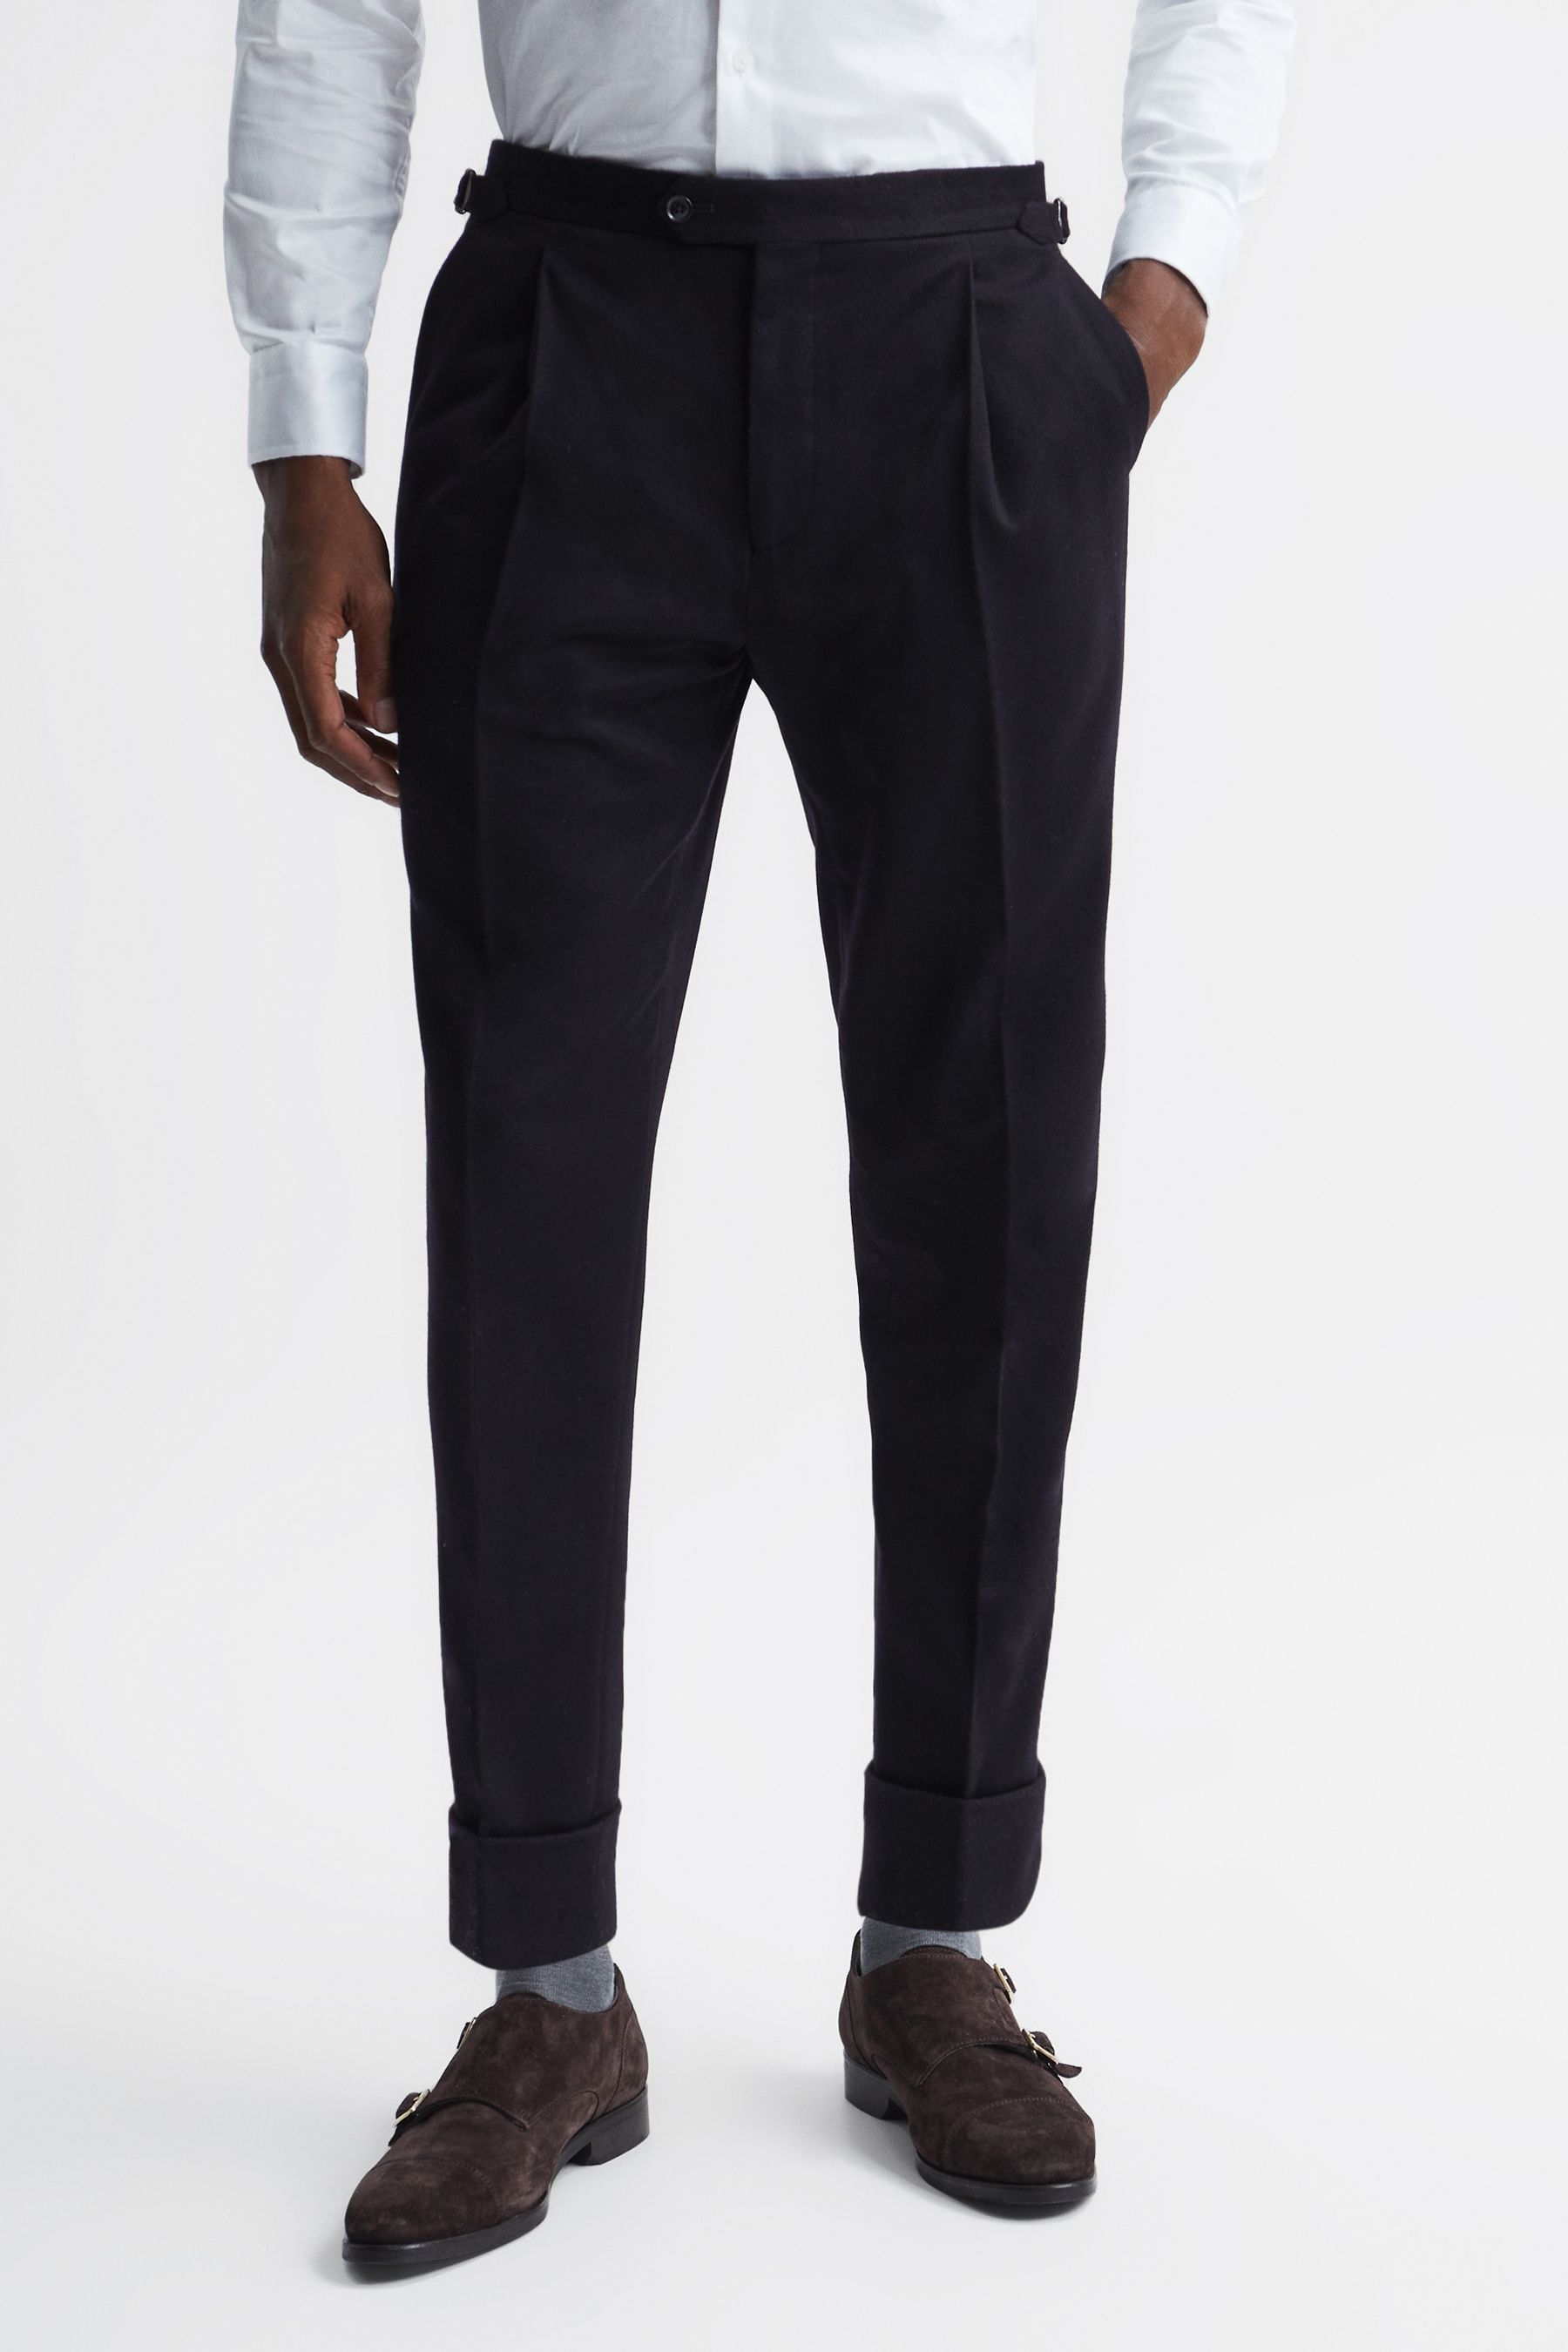 Buy Reiss Navy Langham Cashmere Side Adjuster Trousers from the Next UK ...